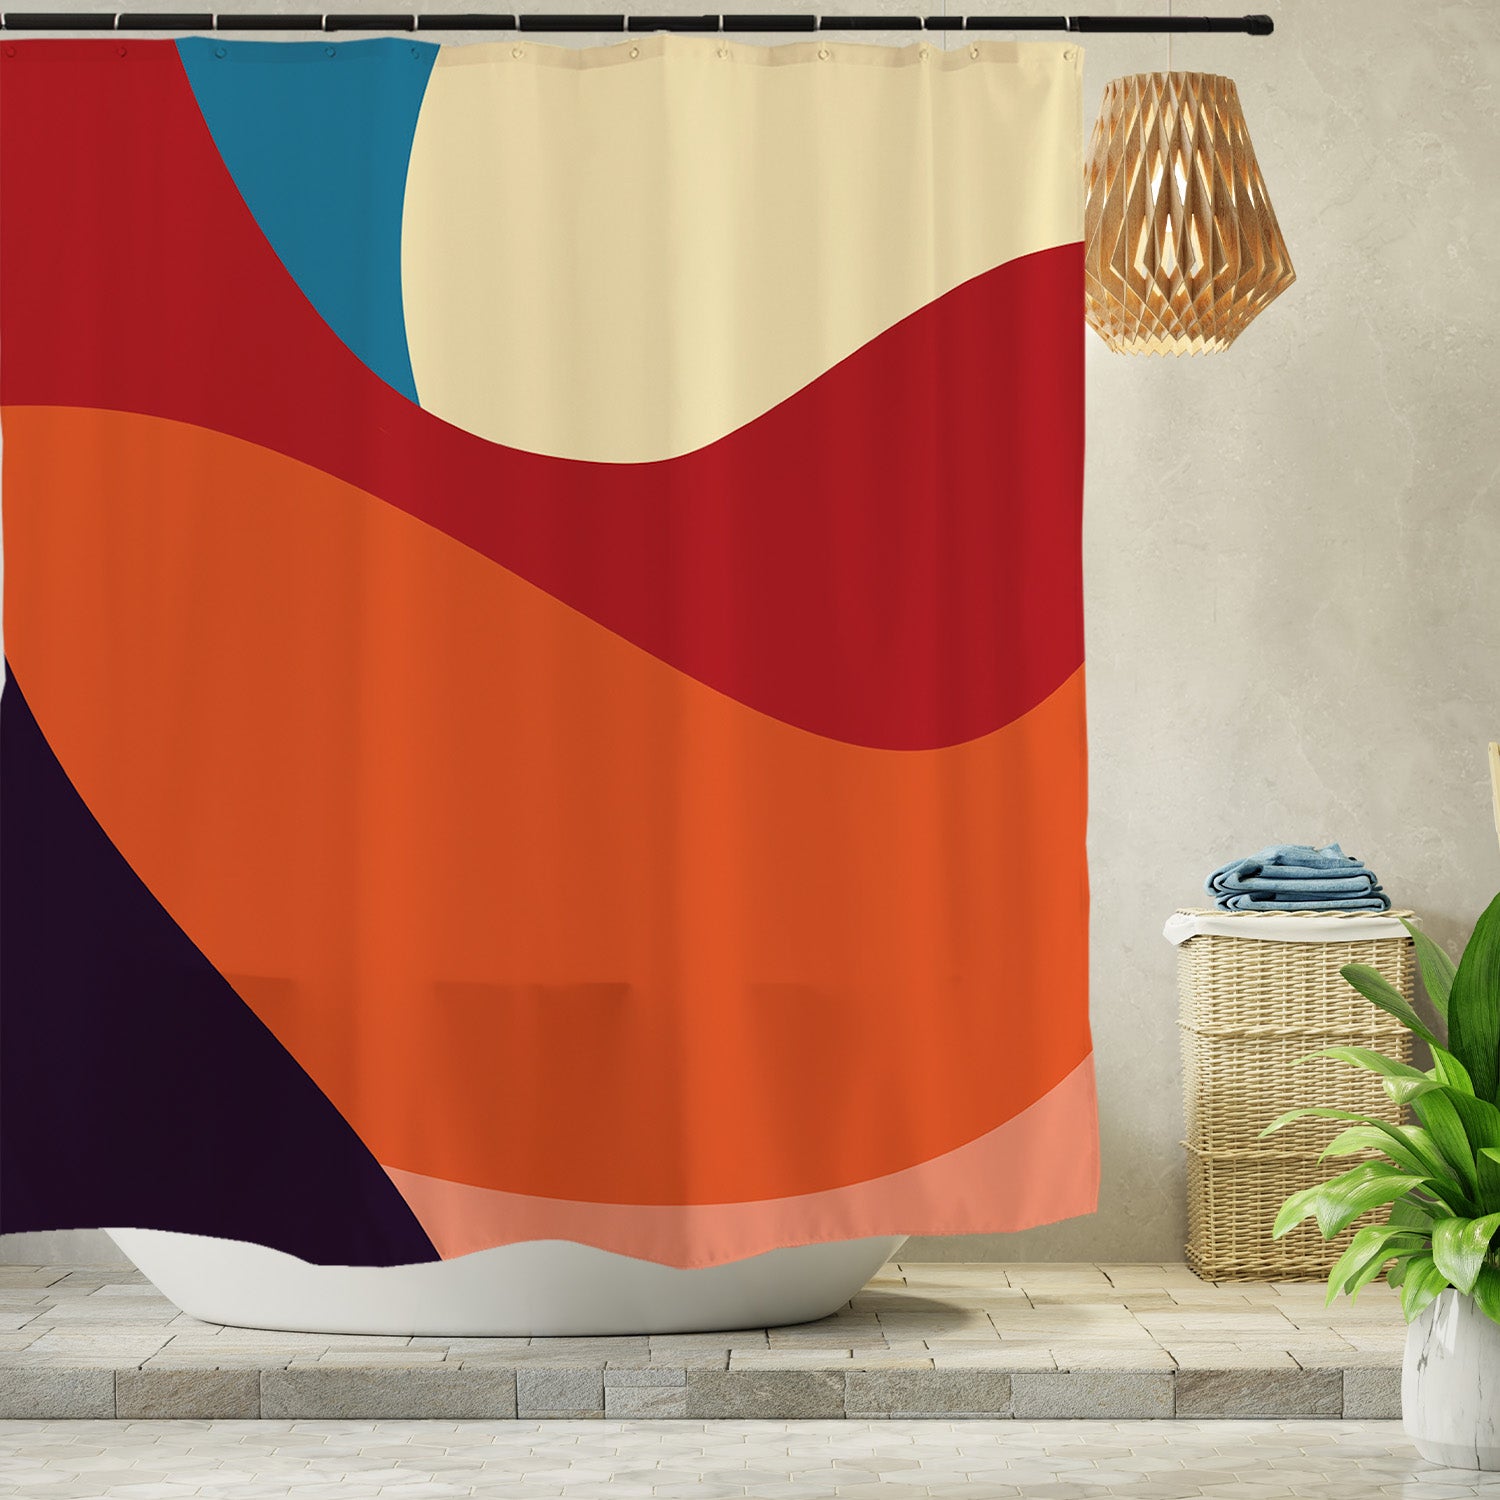 Feblilac Black and Red Abstract Curves Shower Curtain with Hooks